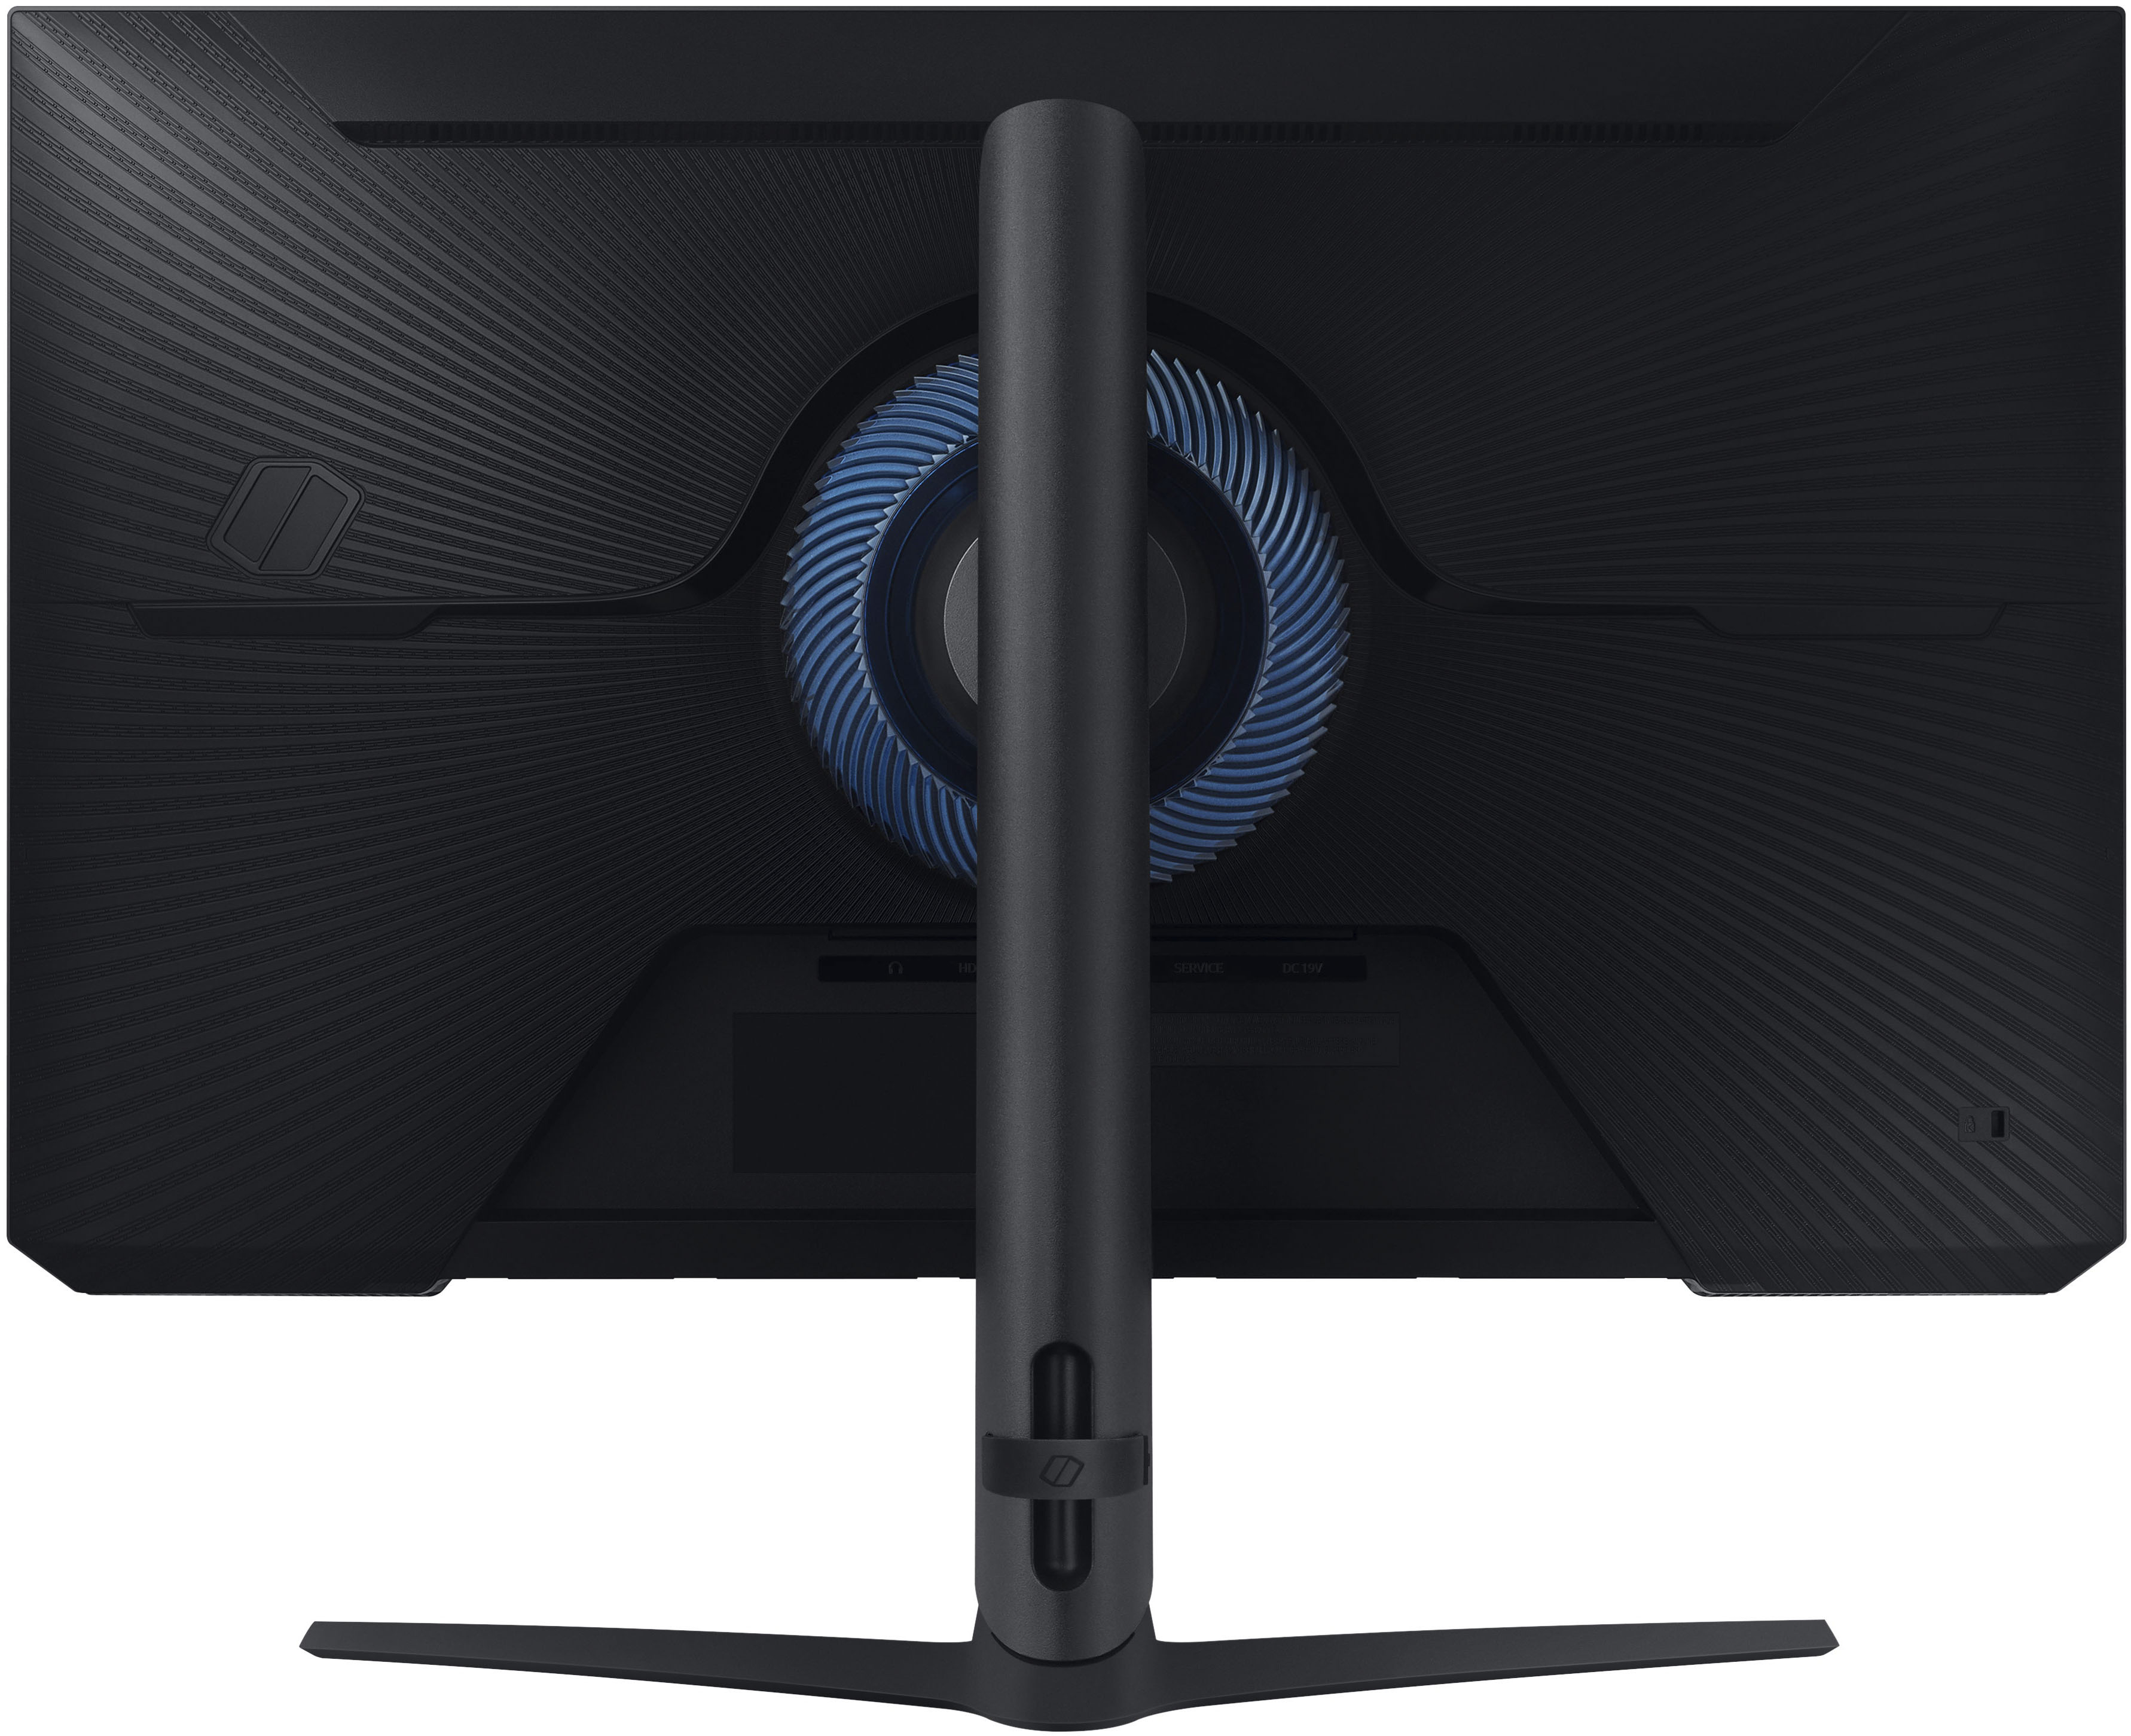 Samsung - Odyssey 27” IPS LED QHD FreeSync & G-Sync Compatible Gaming Monitor with HDR (Display Port, HDMI) - Black